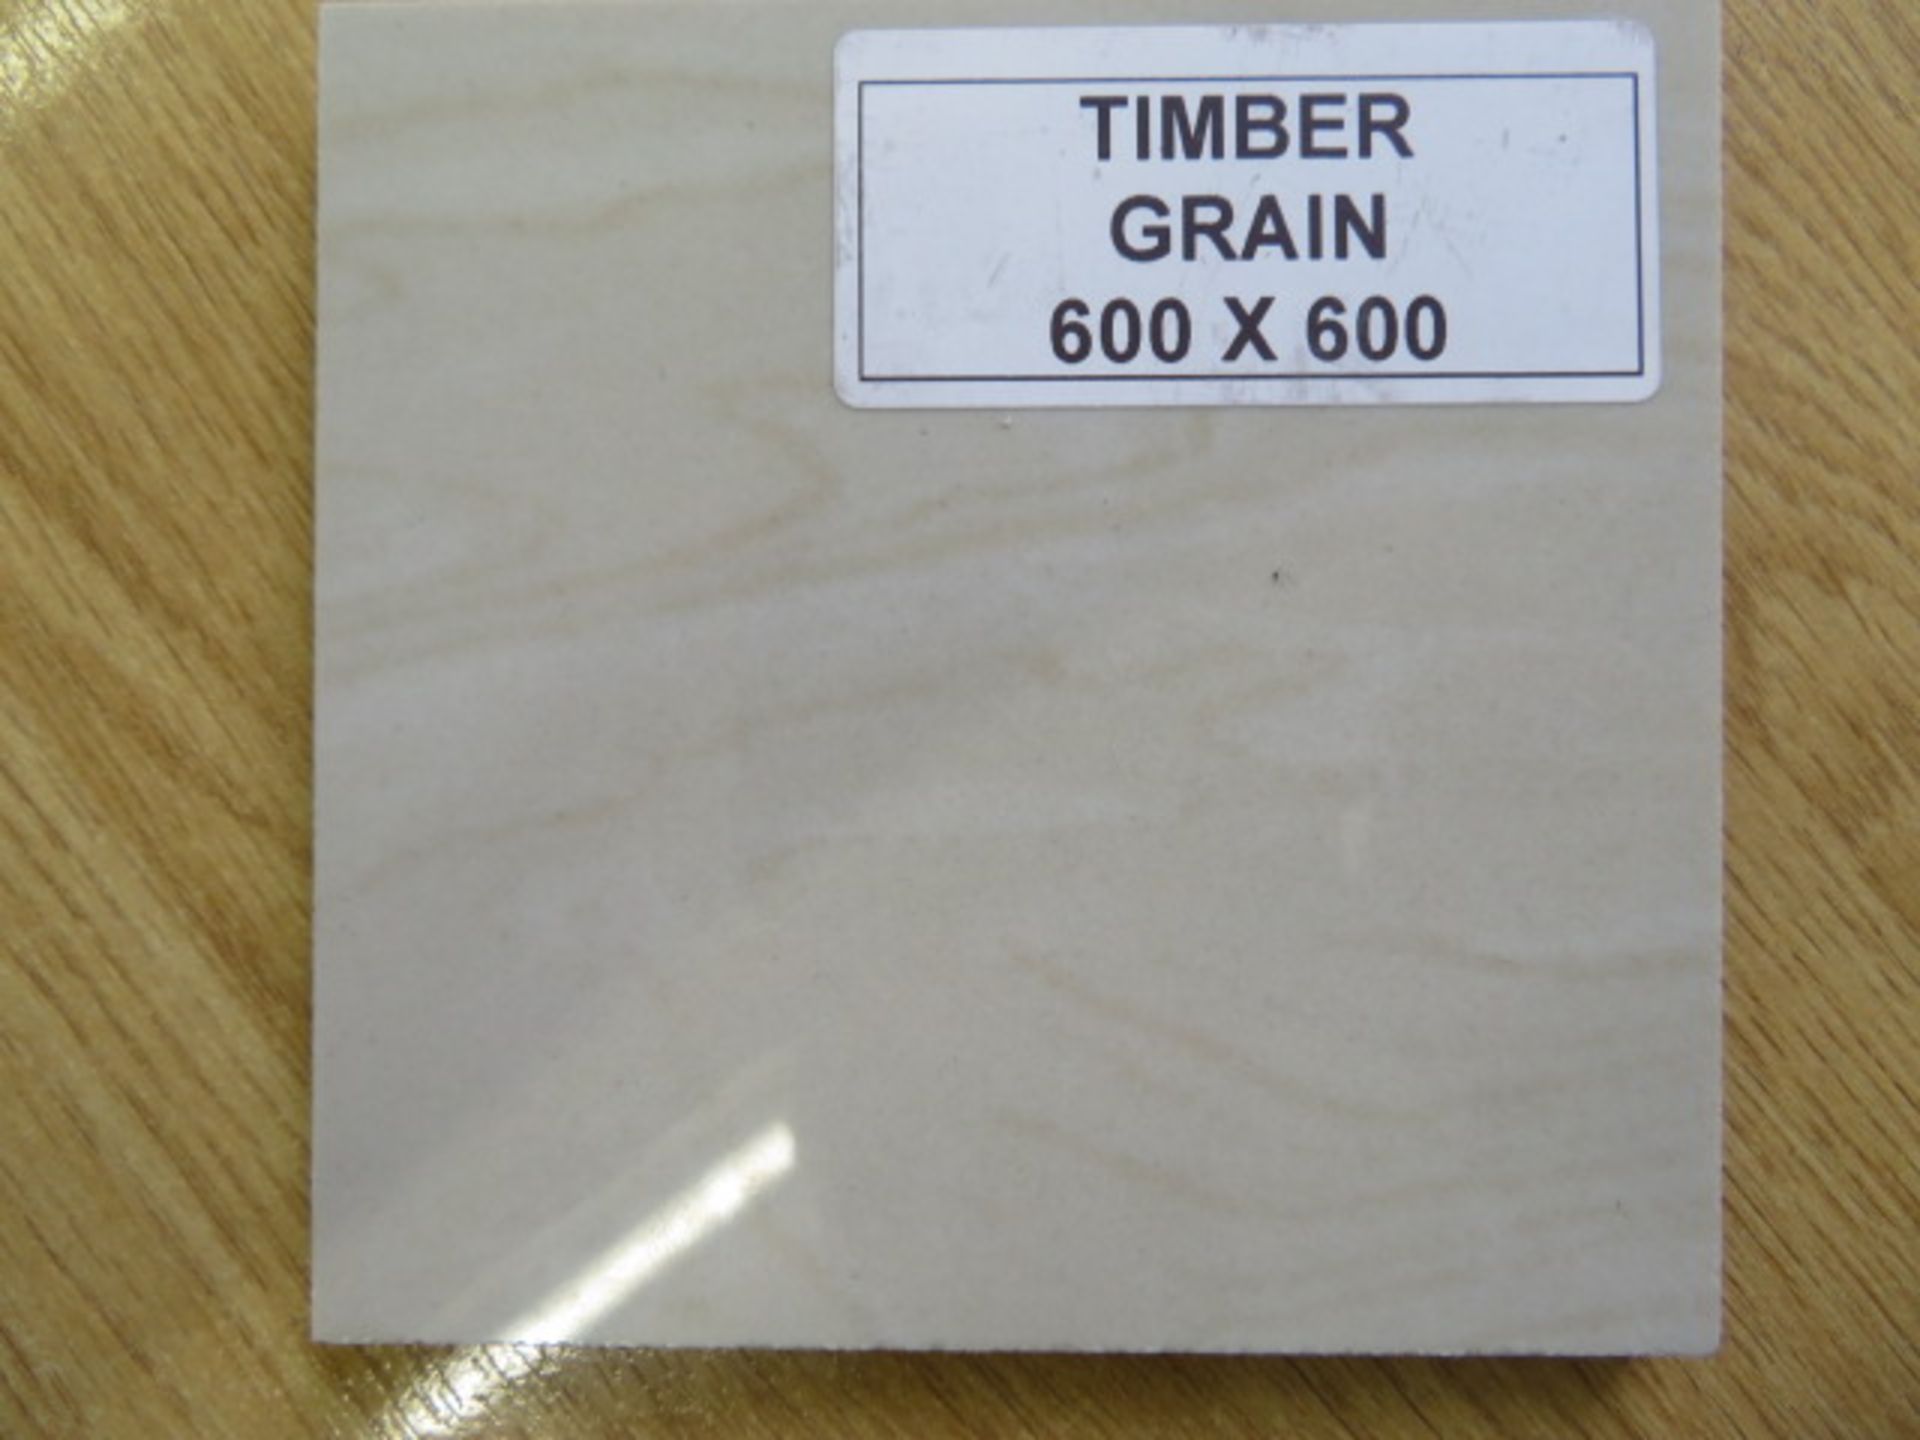 NEW 8.64 Square Meters of Timber Grain Wall and Floor Tiles. 600x600mm per tile. 10mm thick. ... - Image 3 of 3